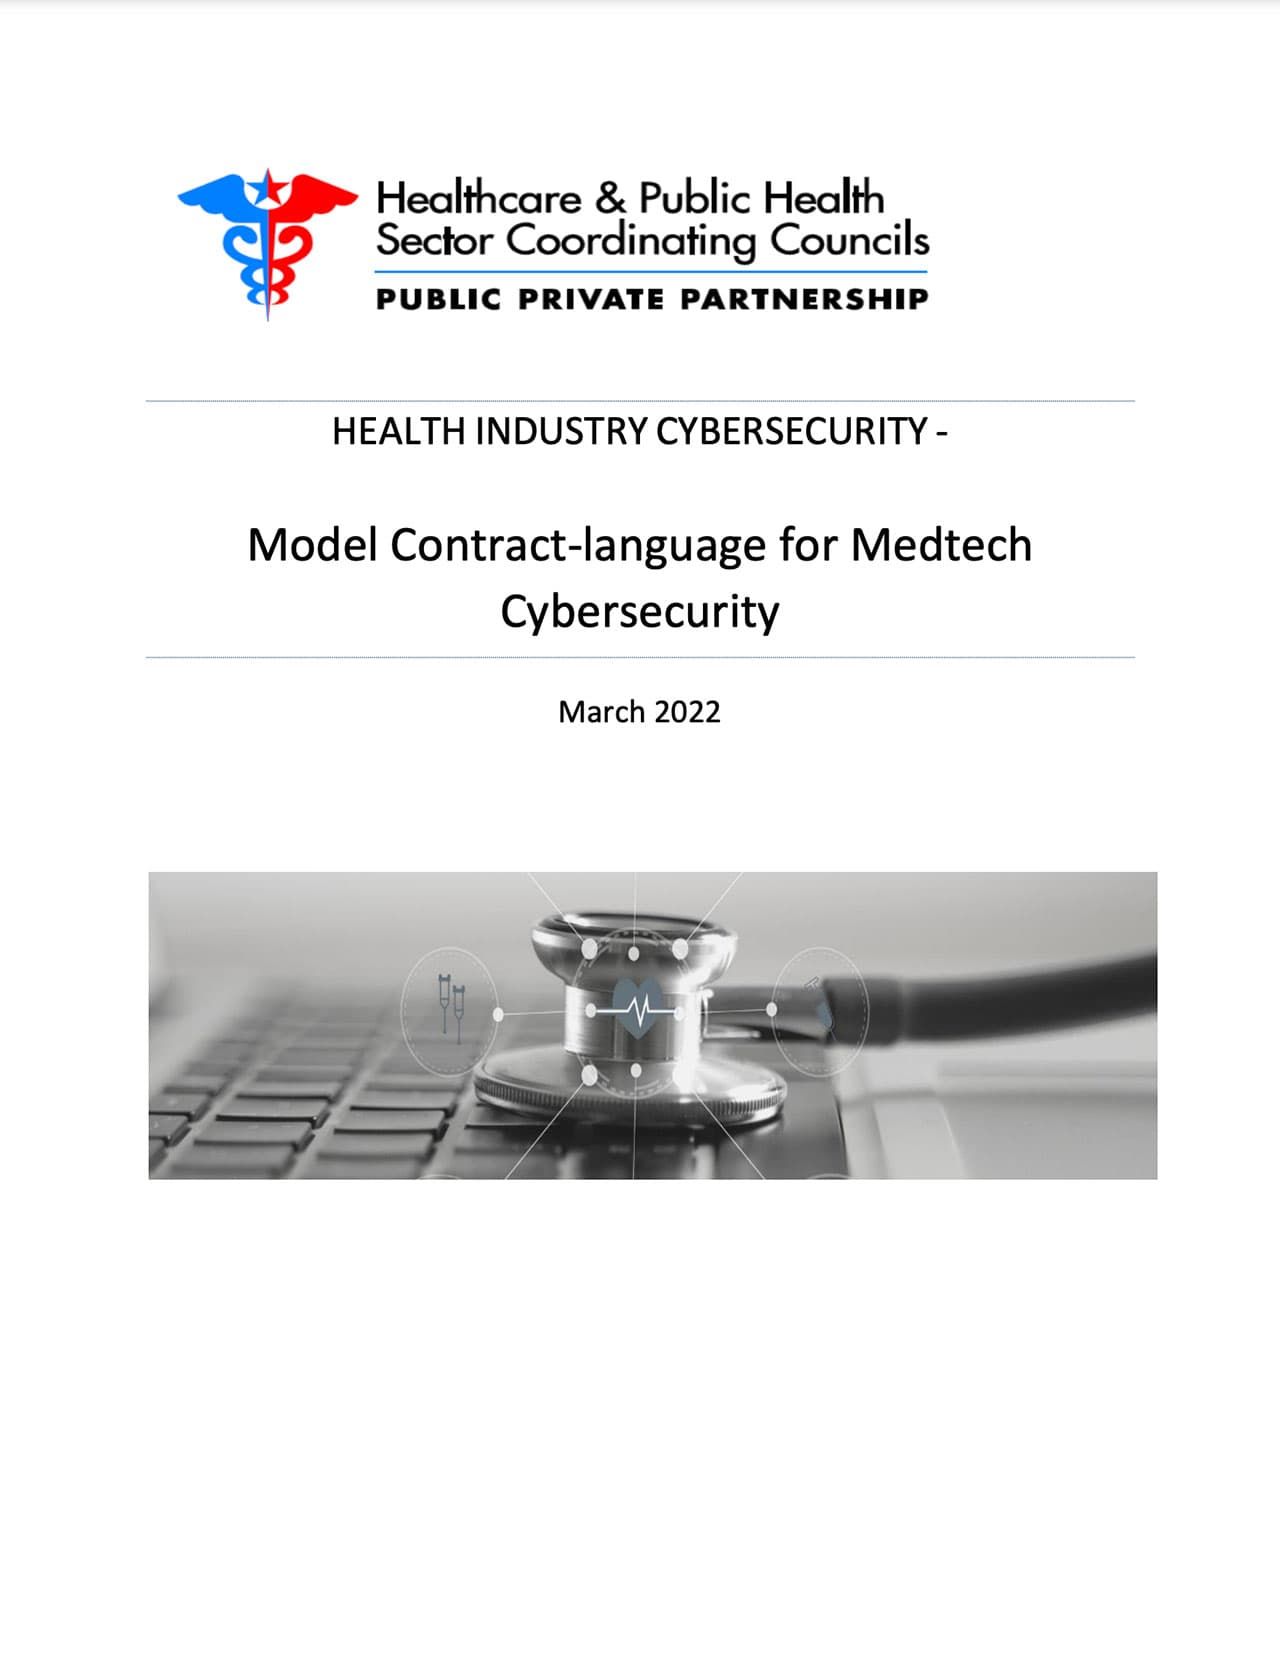 Model Contract-Language for Medtech Cybersecurity (MC2)